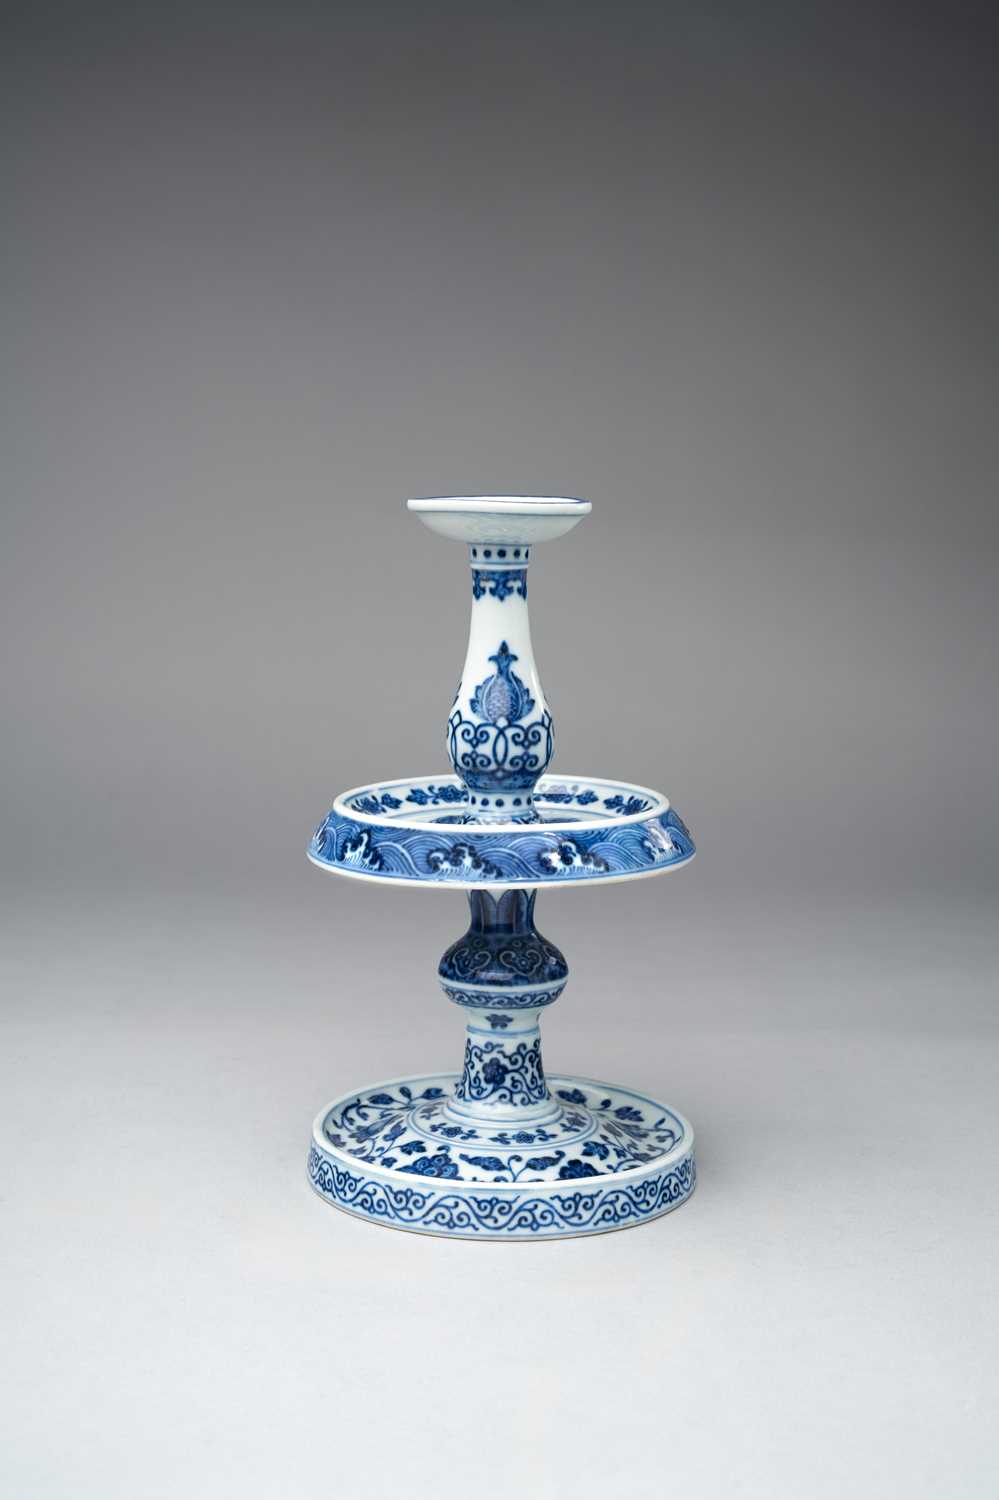 A RARE CHINESE BLUE AND WHITE MING-STYLE ALTAR CANDLESTICK FOUR-CHARACTER QIANLONG MARK AND OF THE